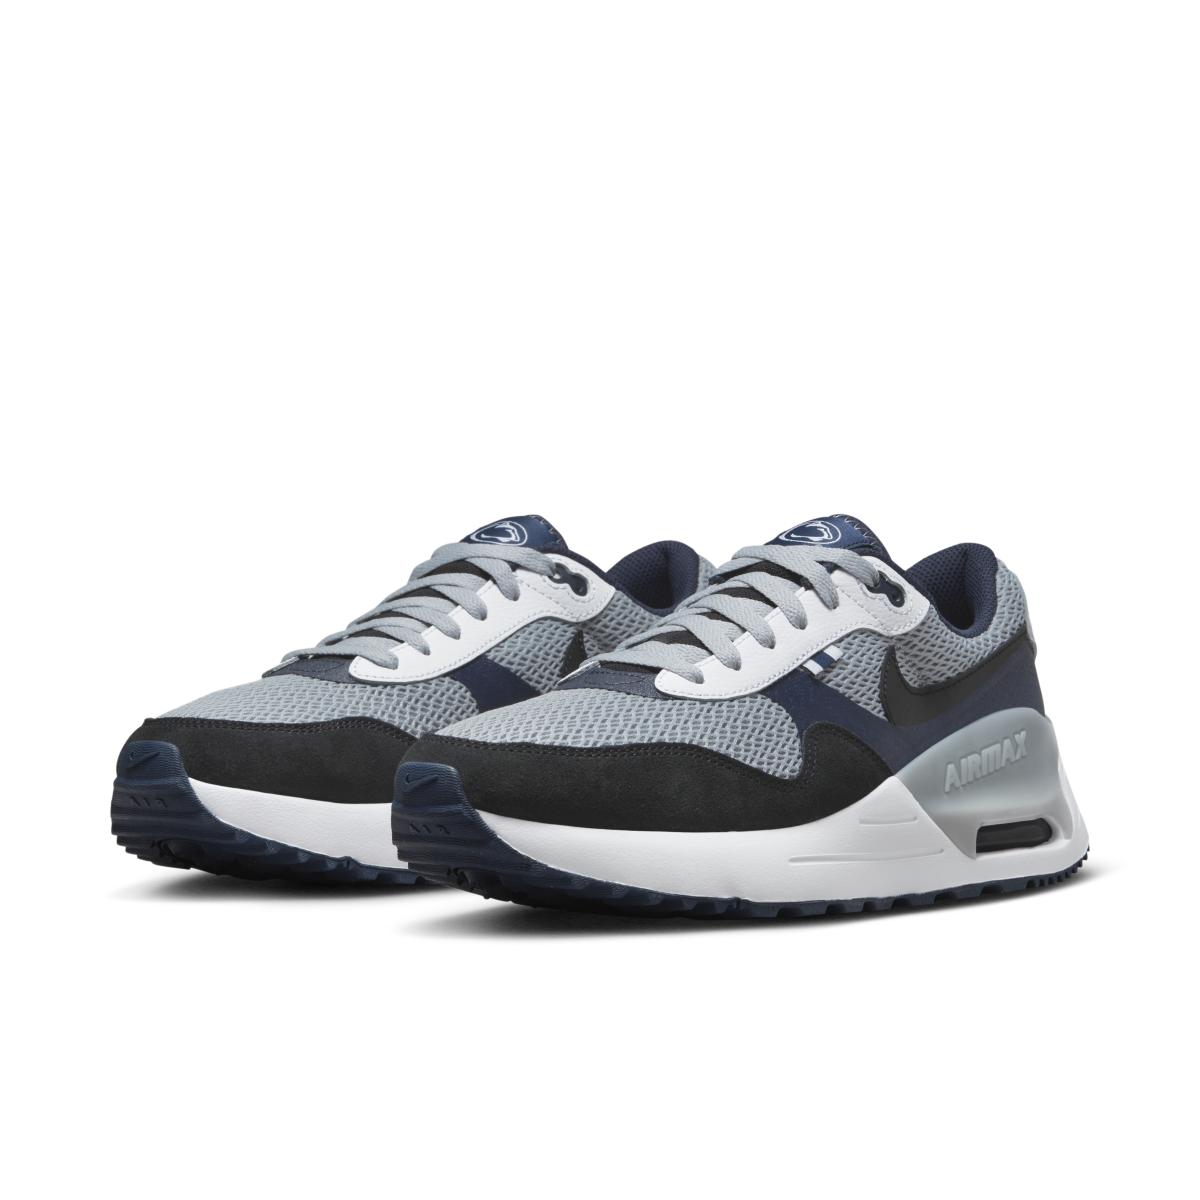 Penn State Nittany Lions Air Max SYSTM - $109.99